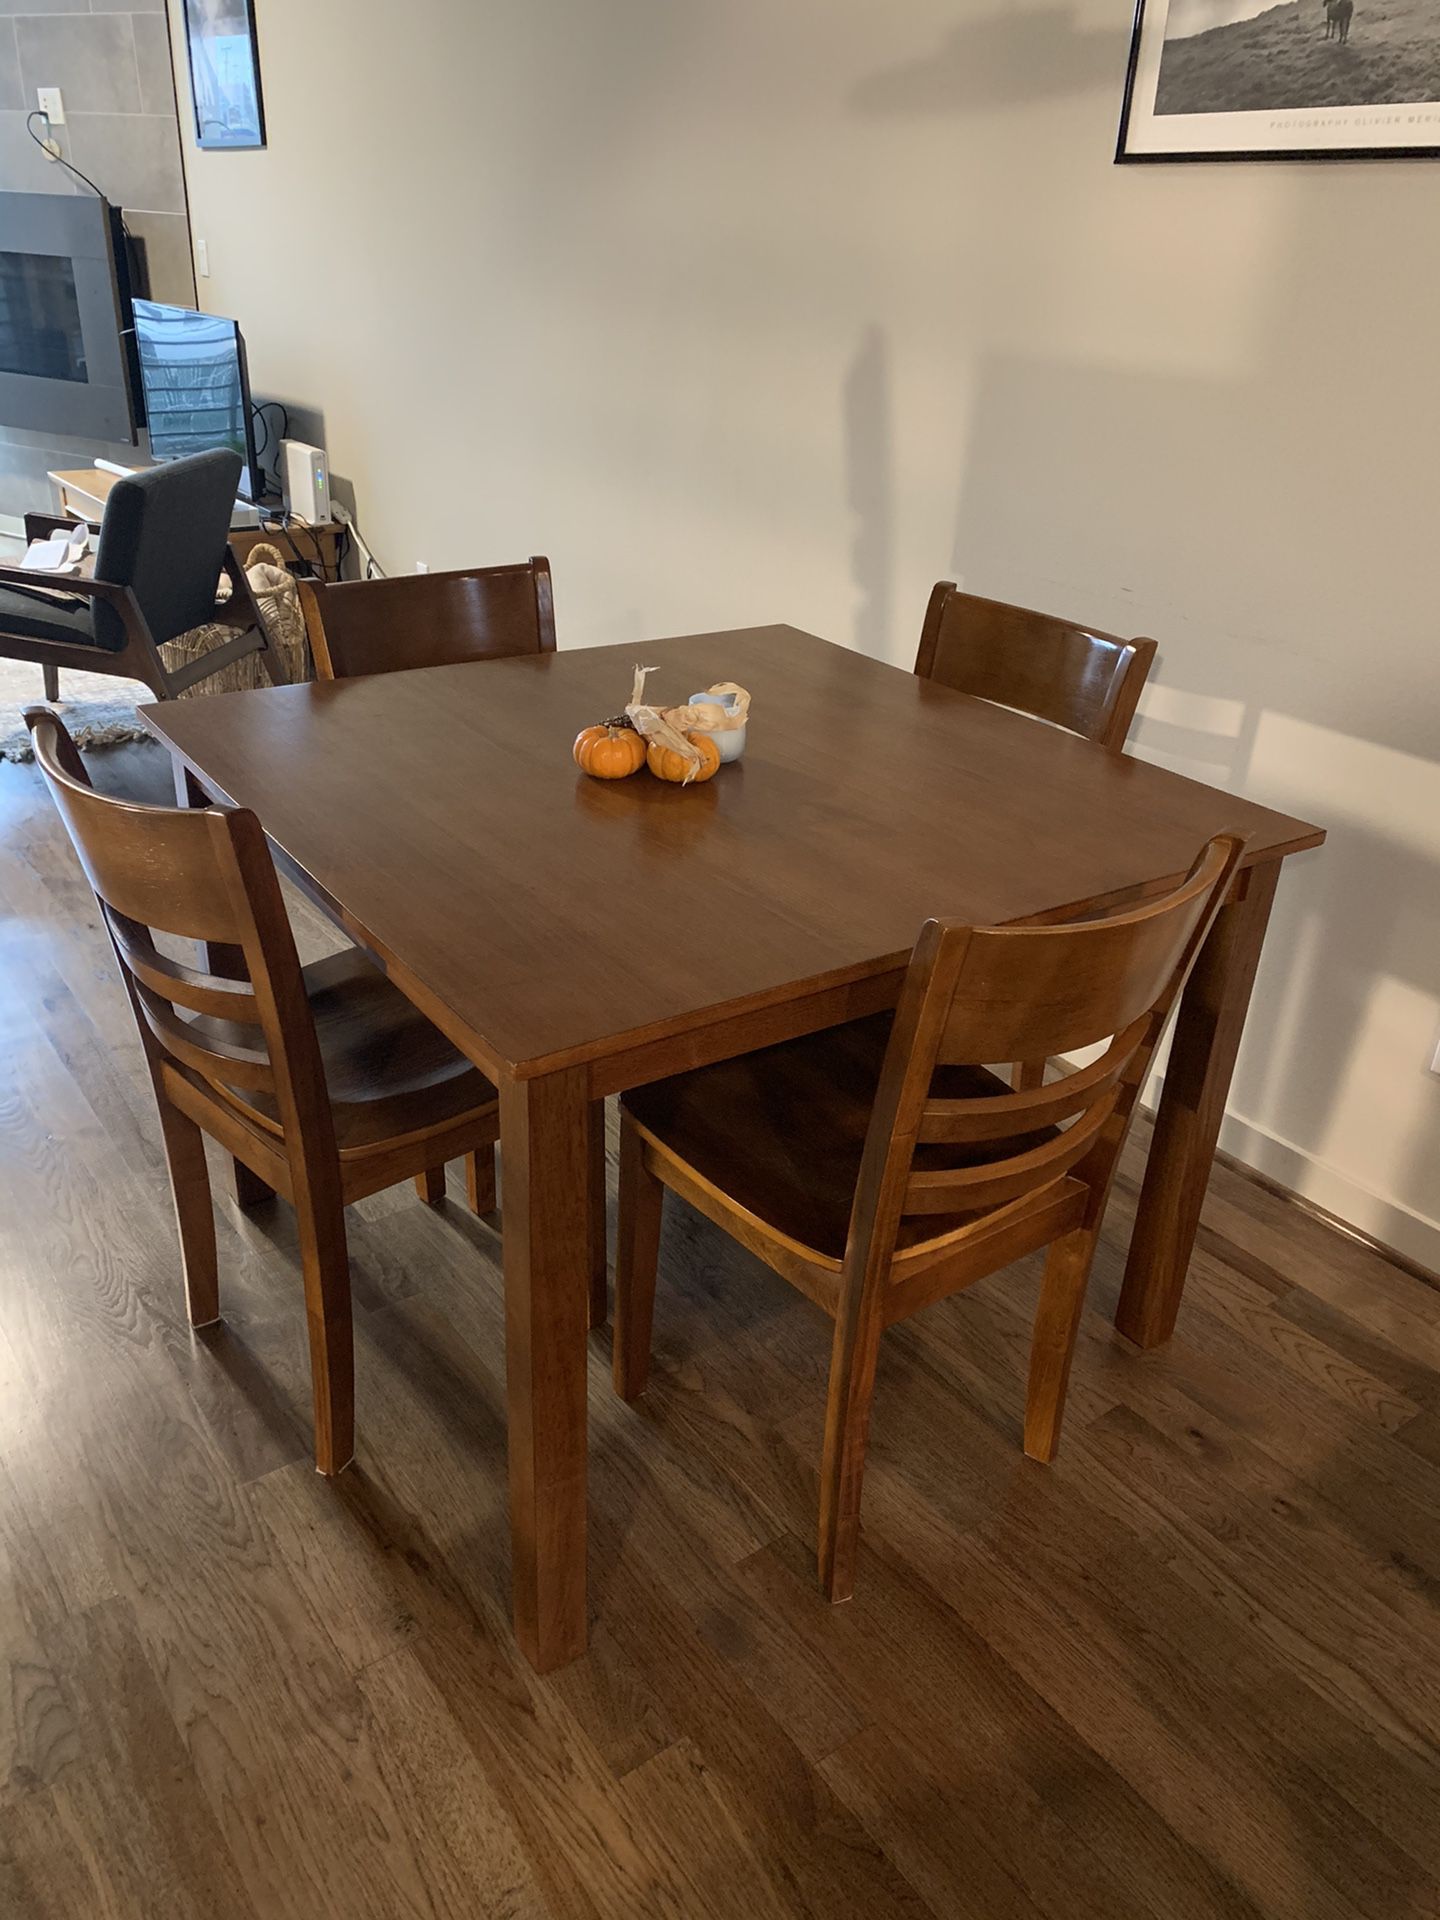 Kitchen dining table set with chairs